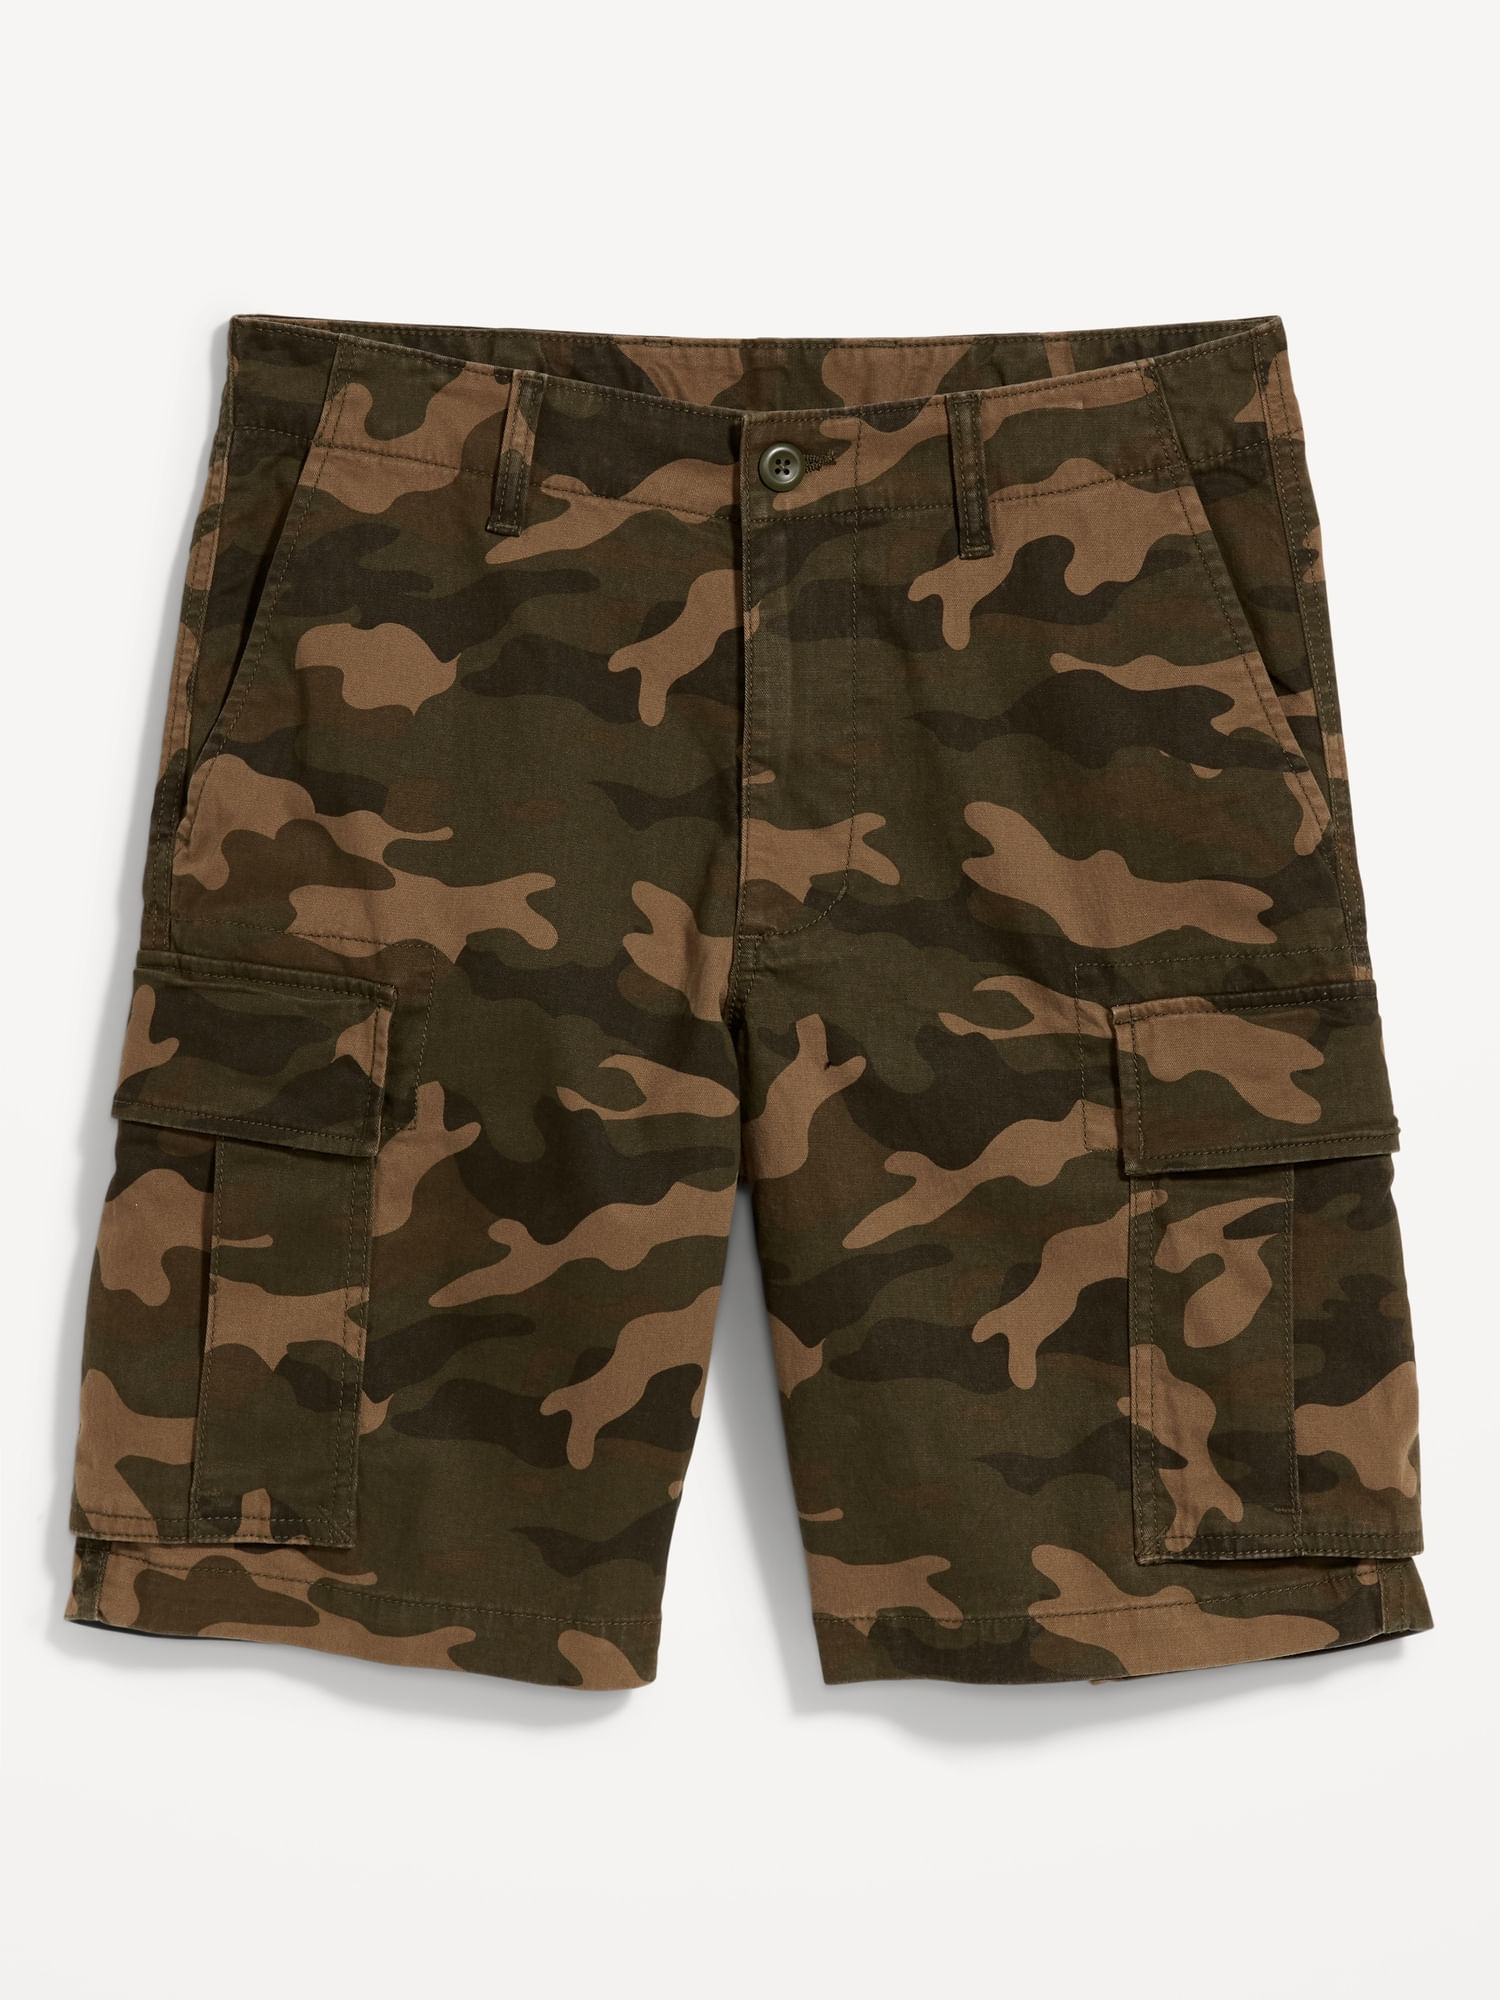 taquigrafía Con Si Shorts tipo Cargo Relaxed Lived-In Old Navy camuflaje, militar para Hombre  | Old Navy - Old Navy MX